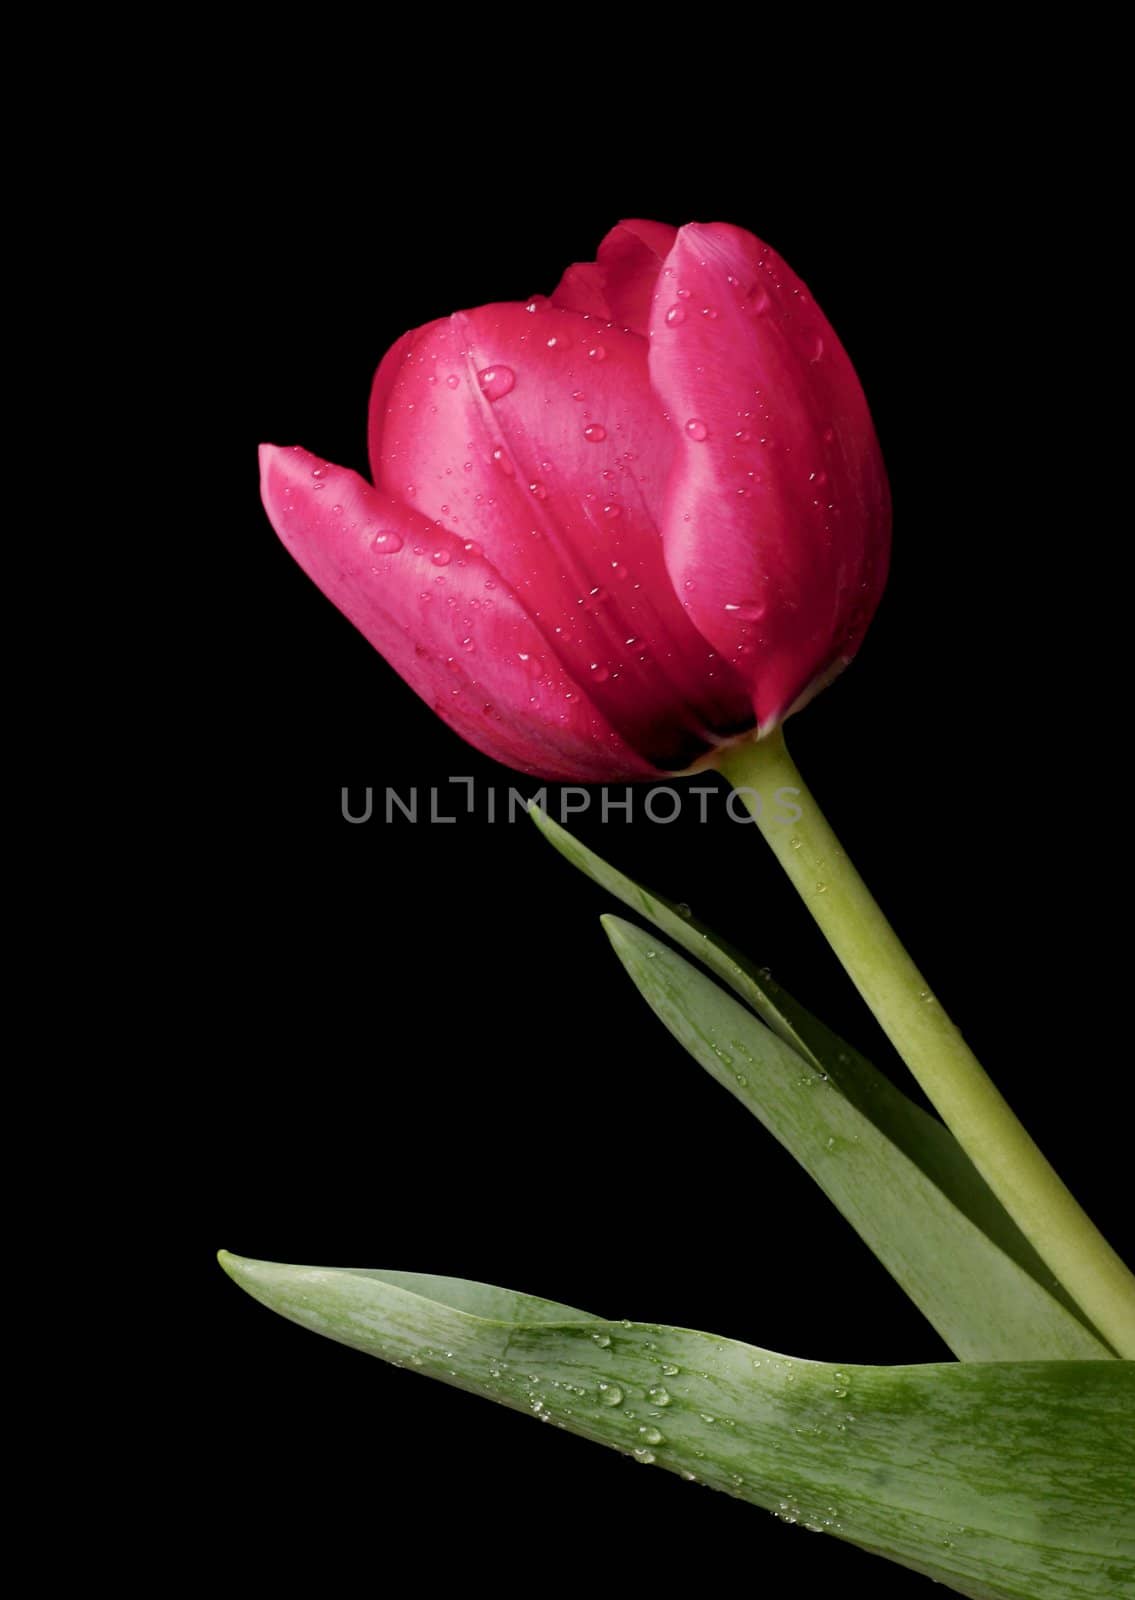 A red tulip with beads of water on petals, stem and leaves against a dark background